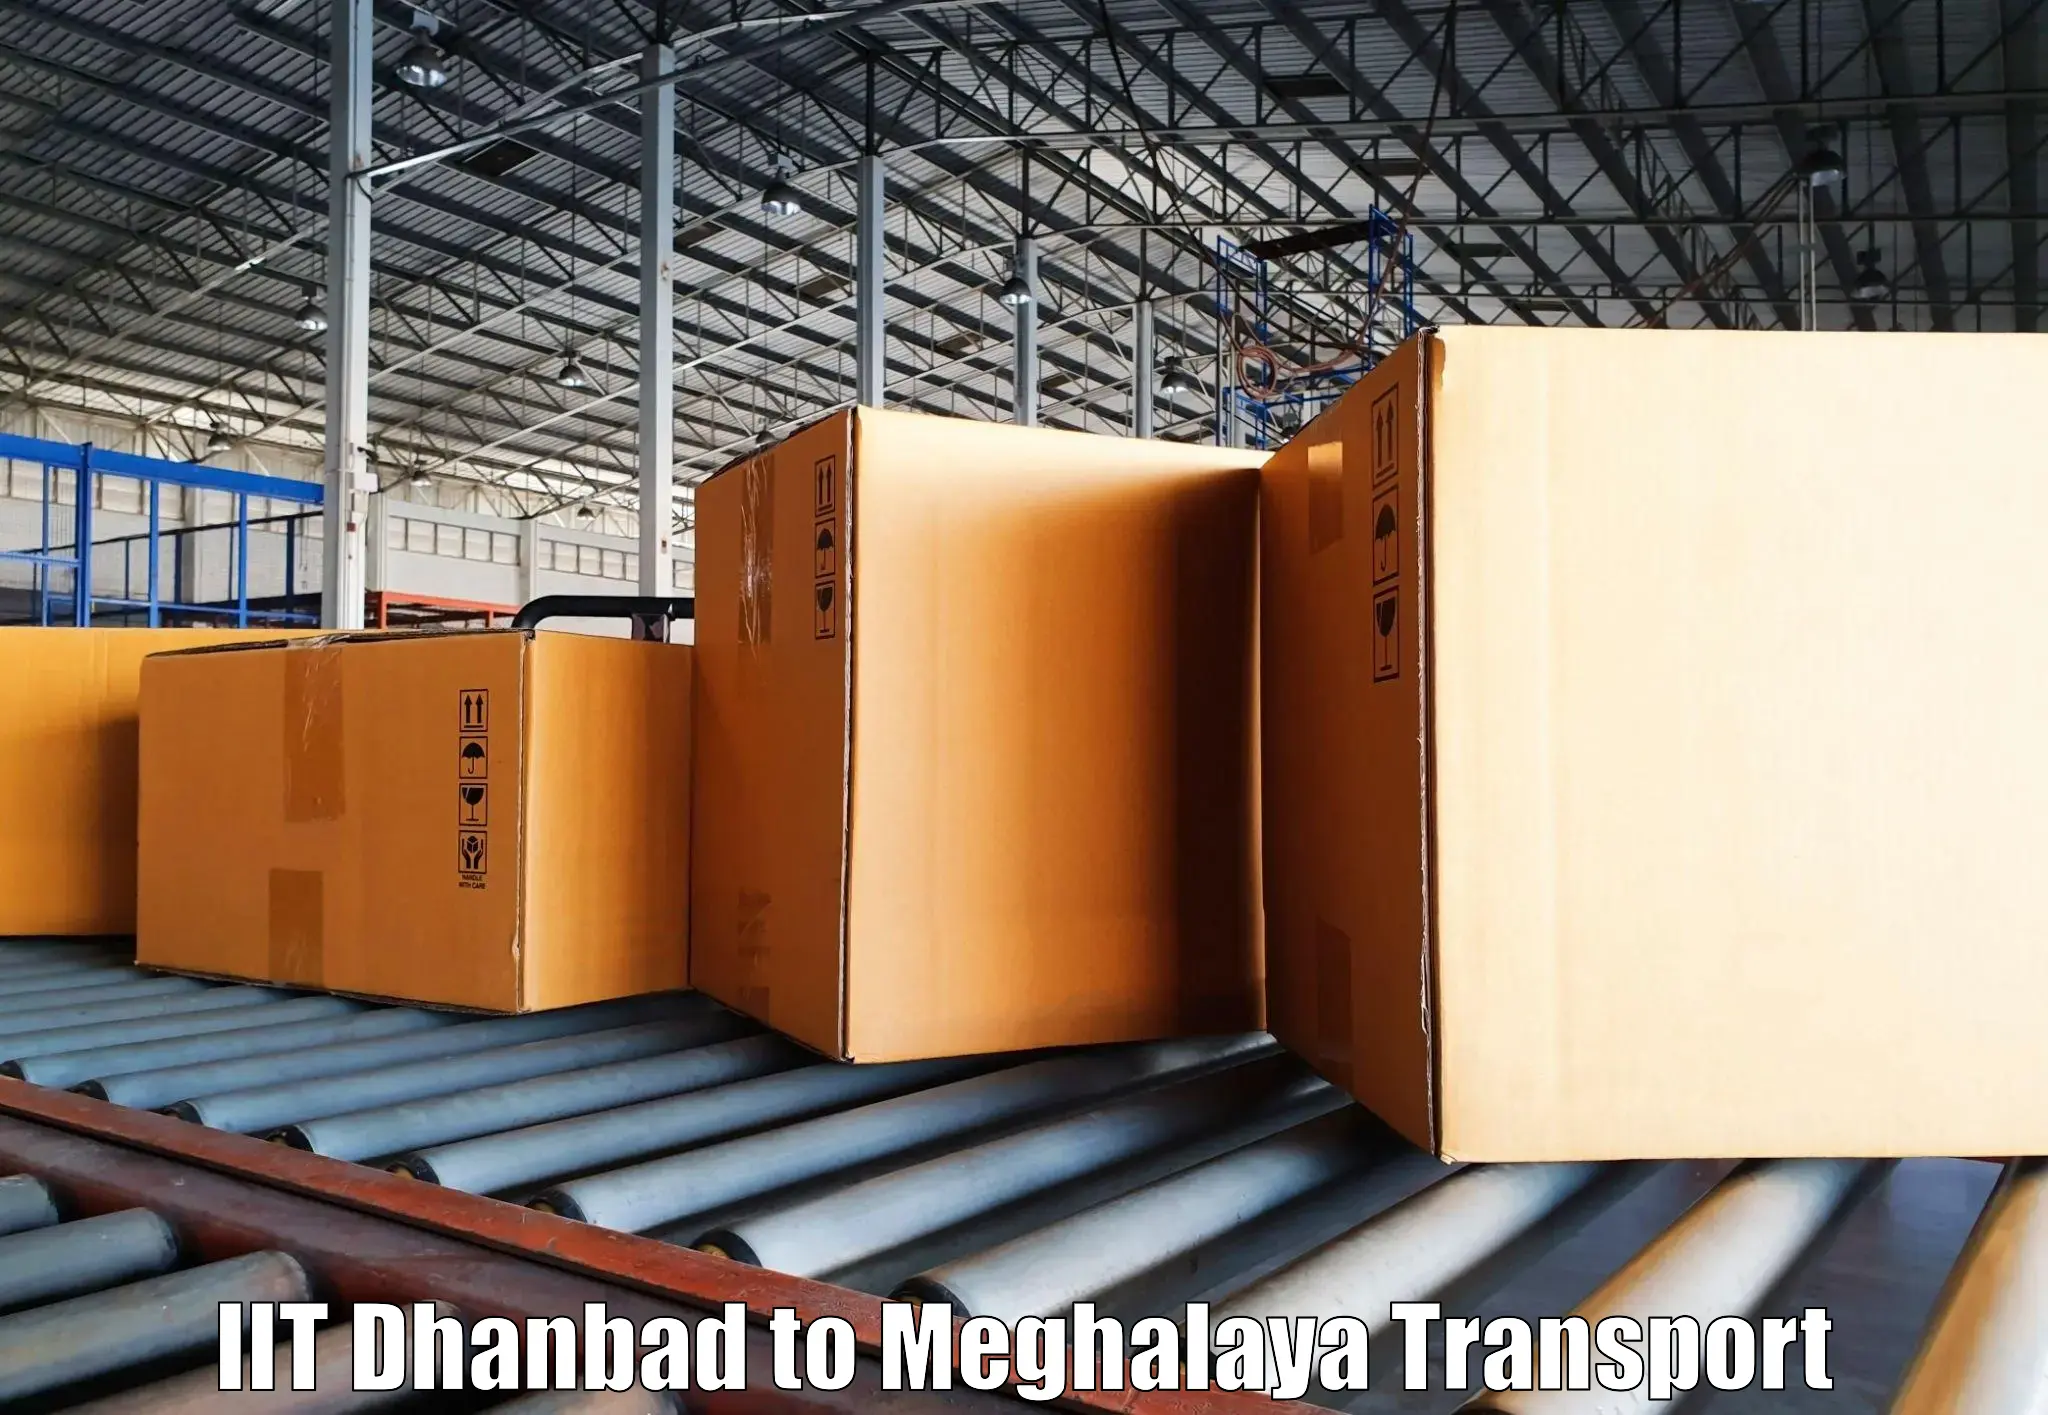 Container transport service IIT Dhanbad to Shillong